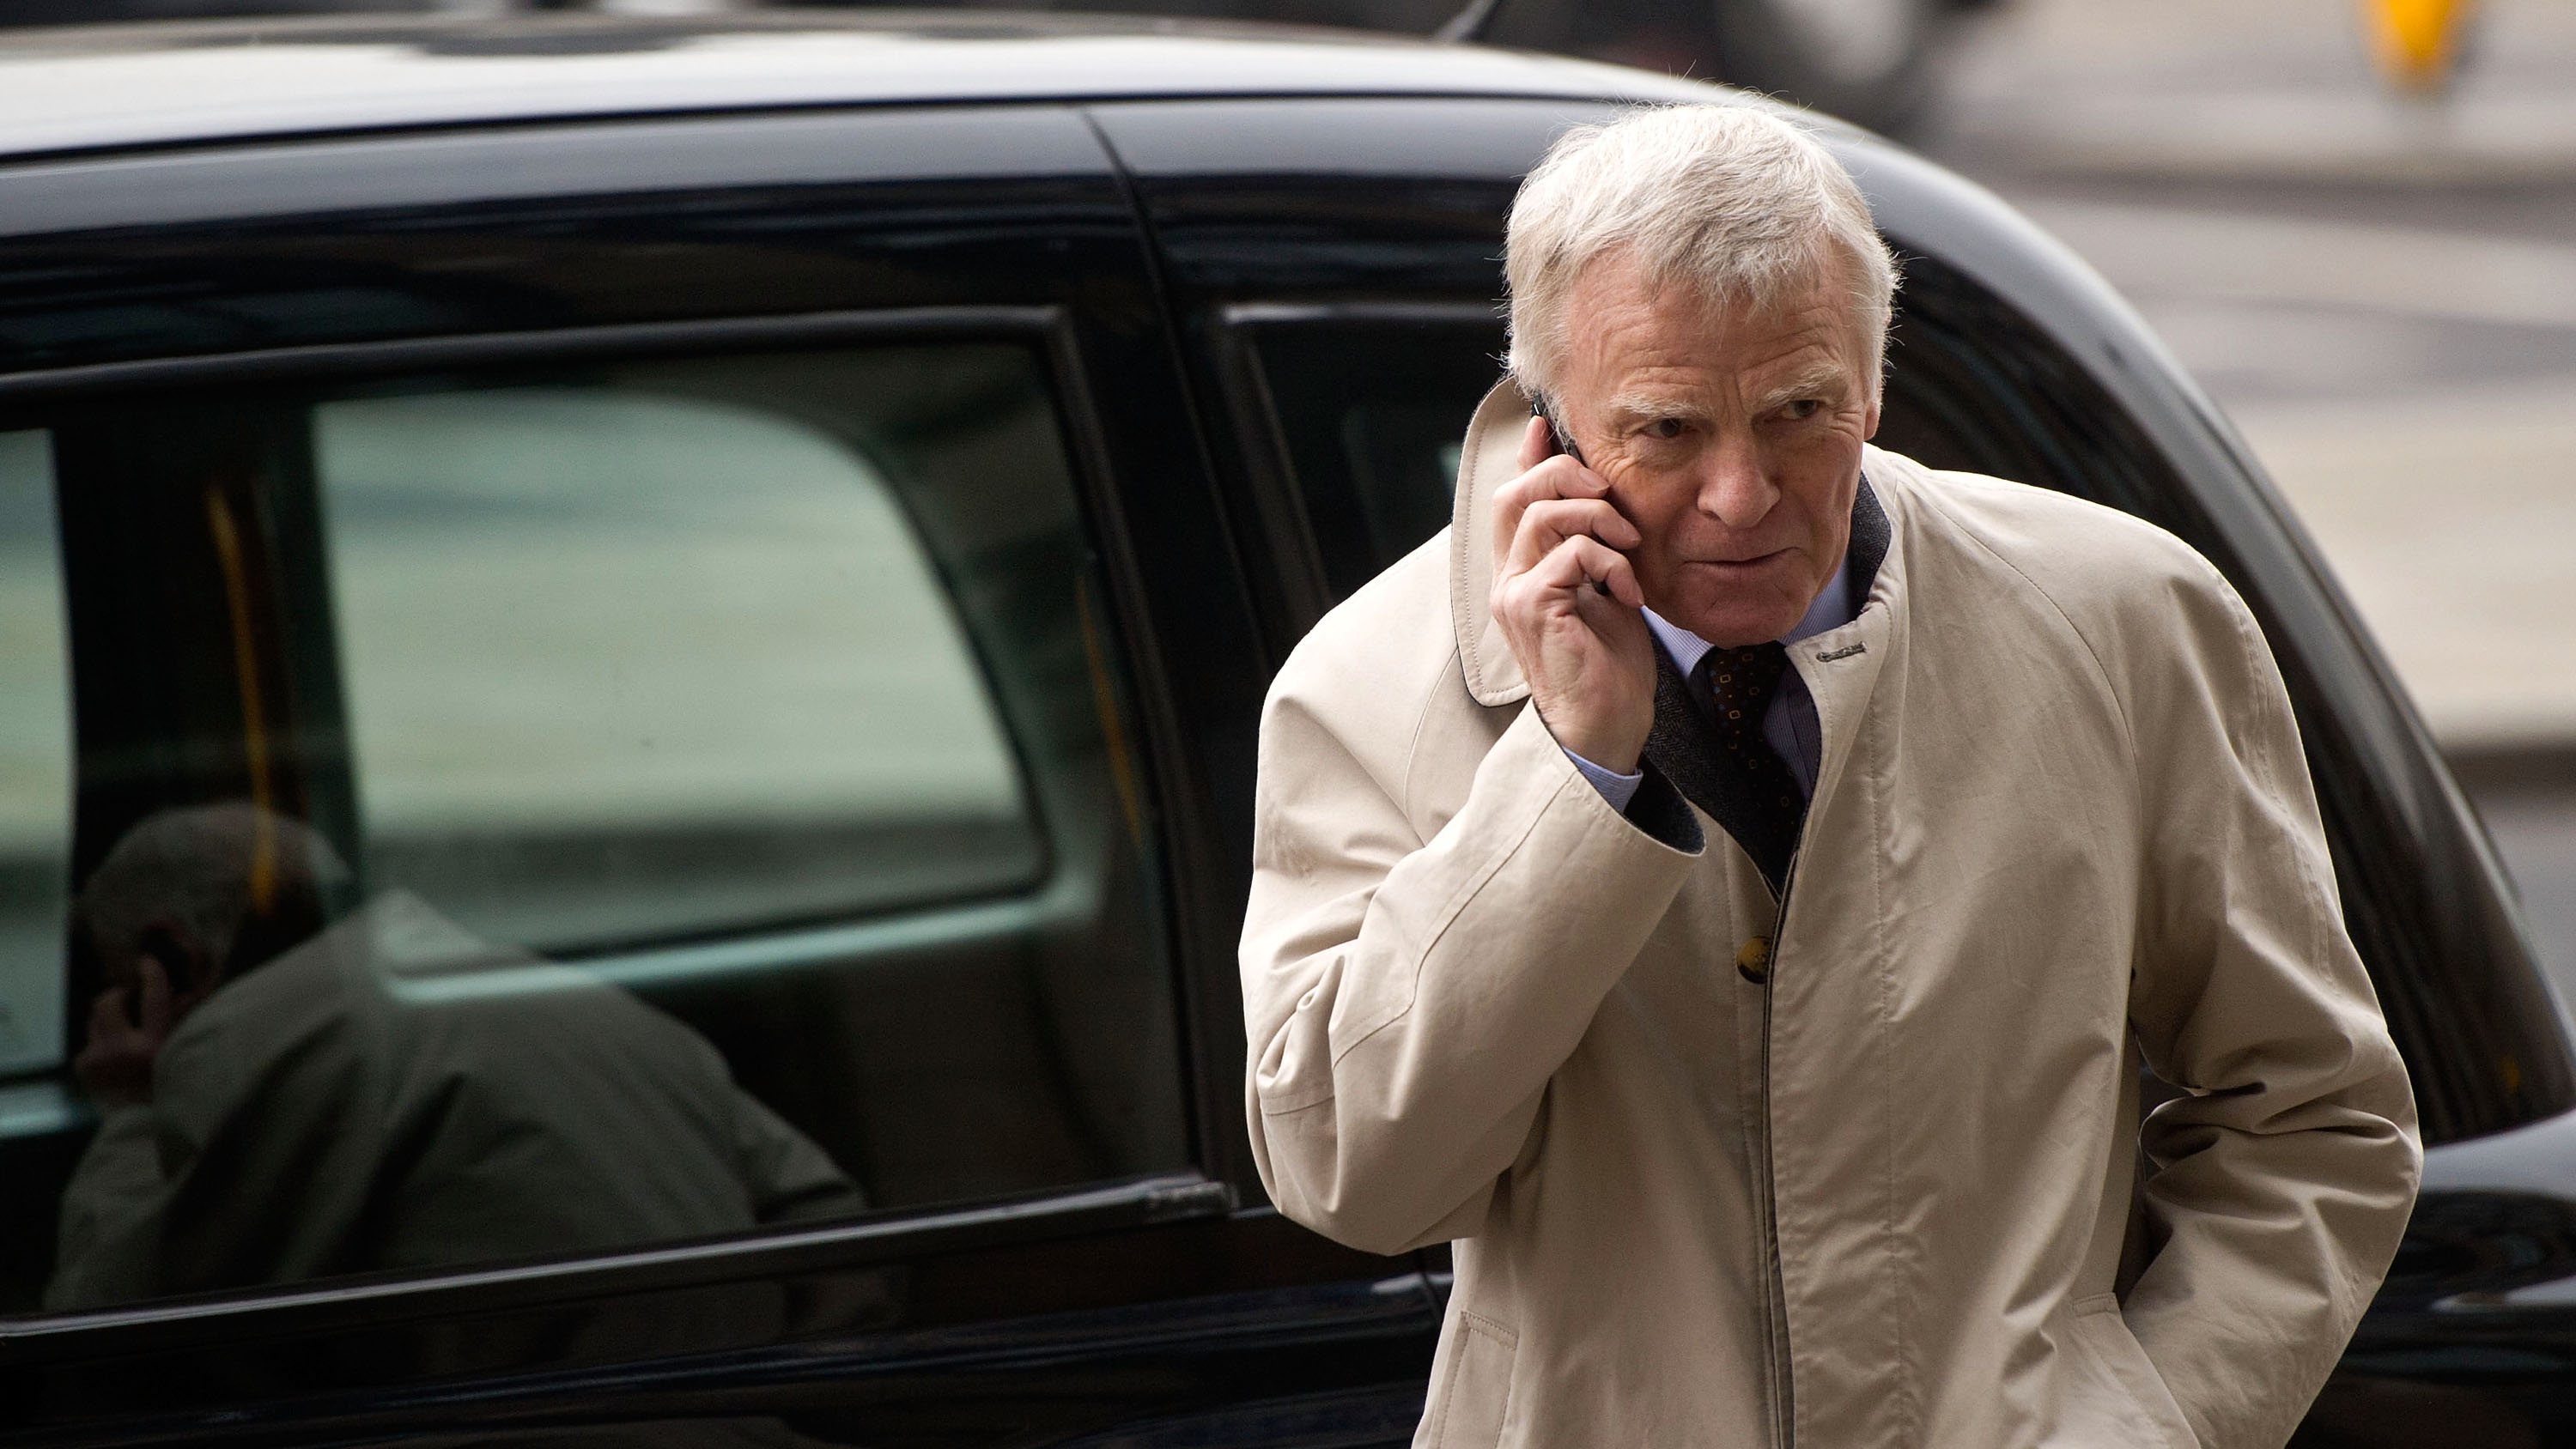 Max Mosley And Representatives Of The NUJ Arrive To Give Evidence To A Select Committee On Regulation Of The Press